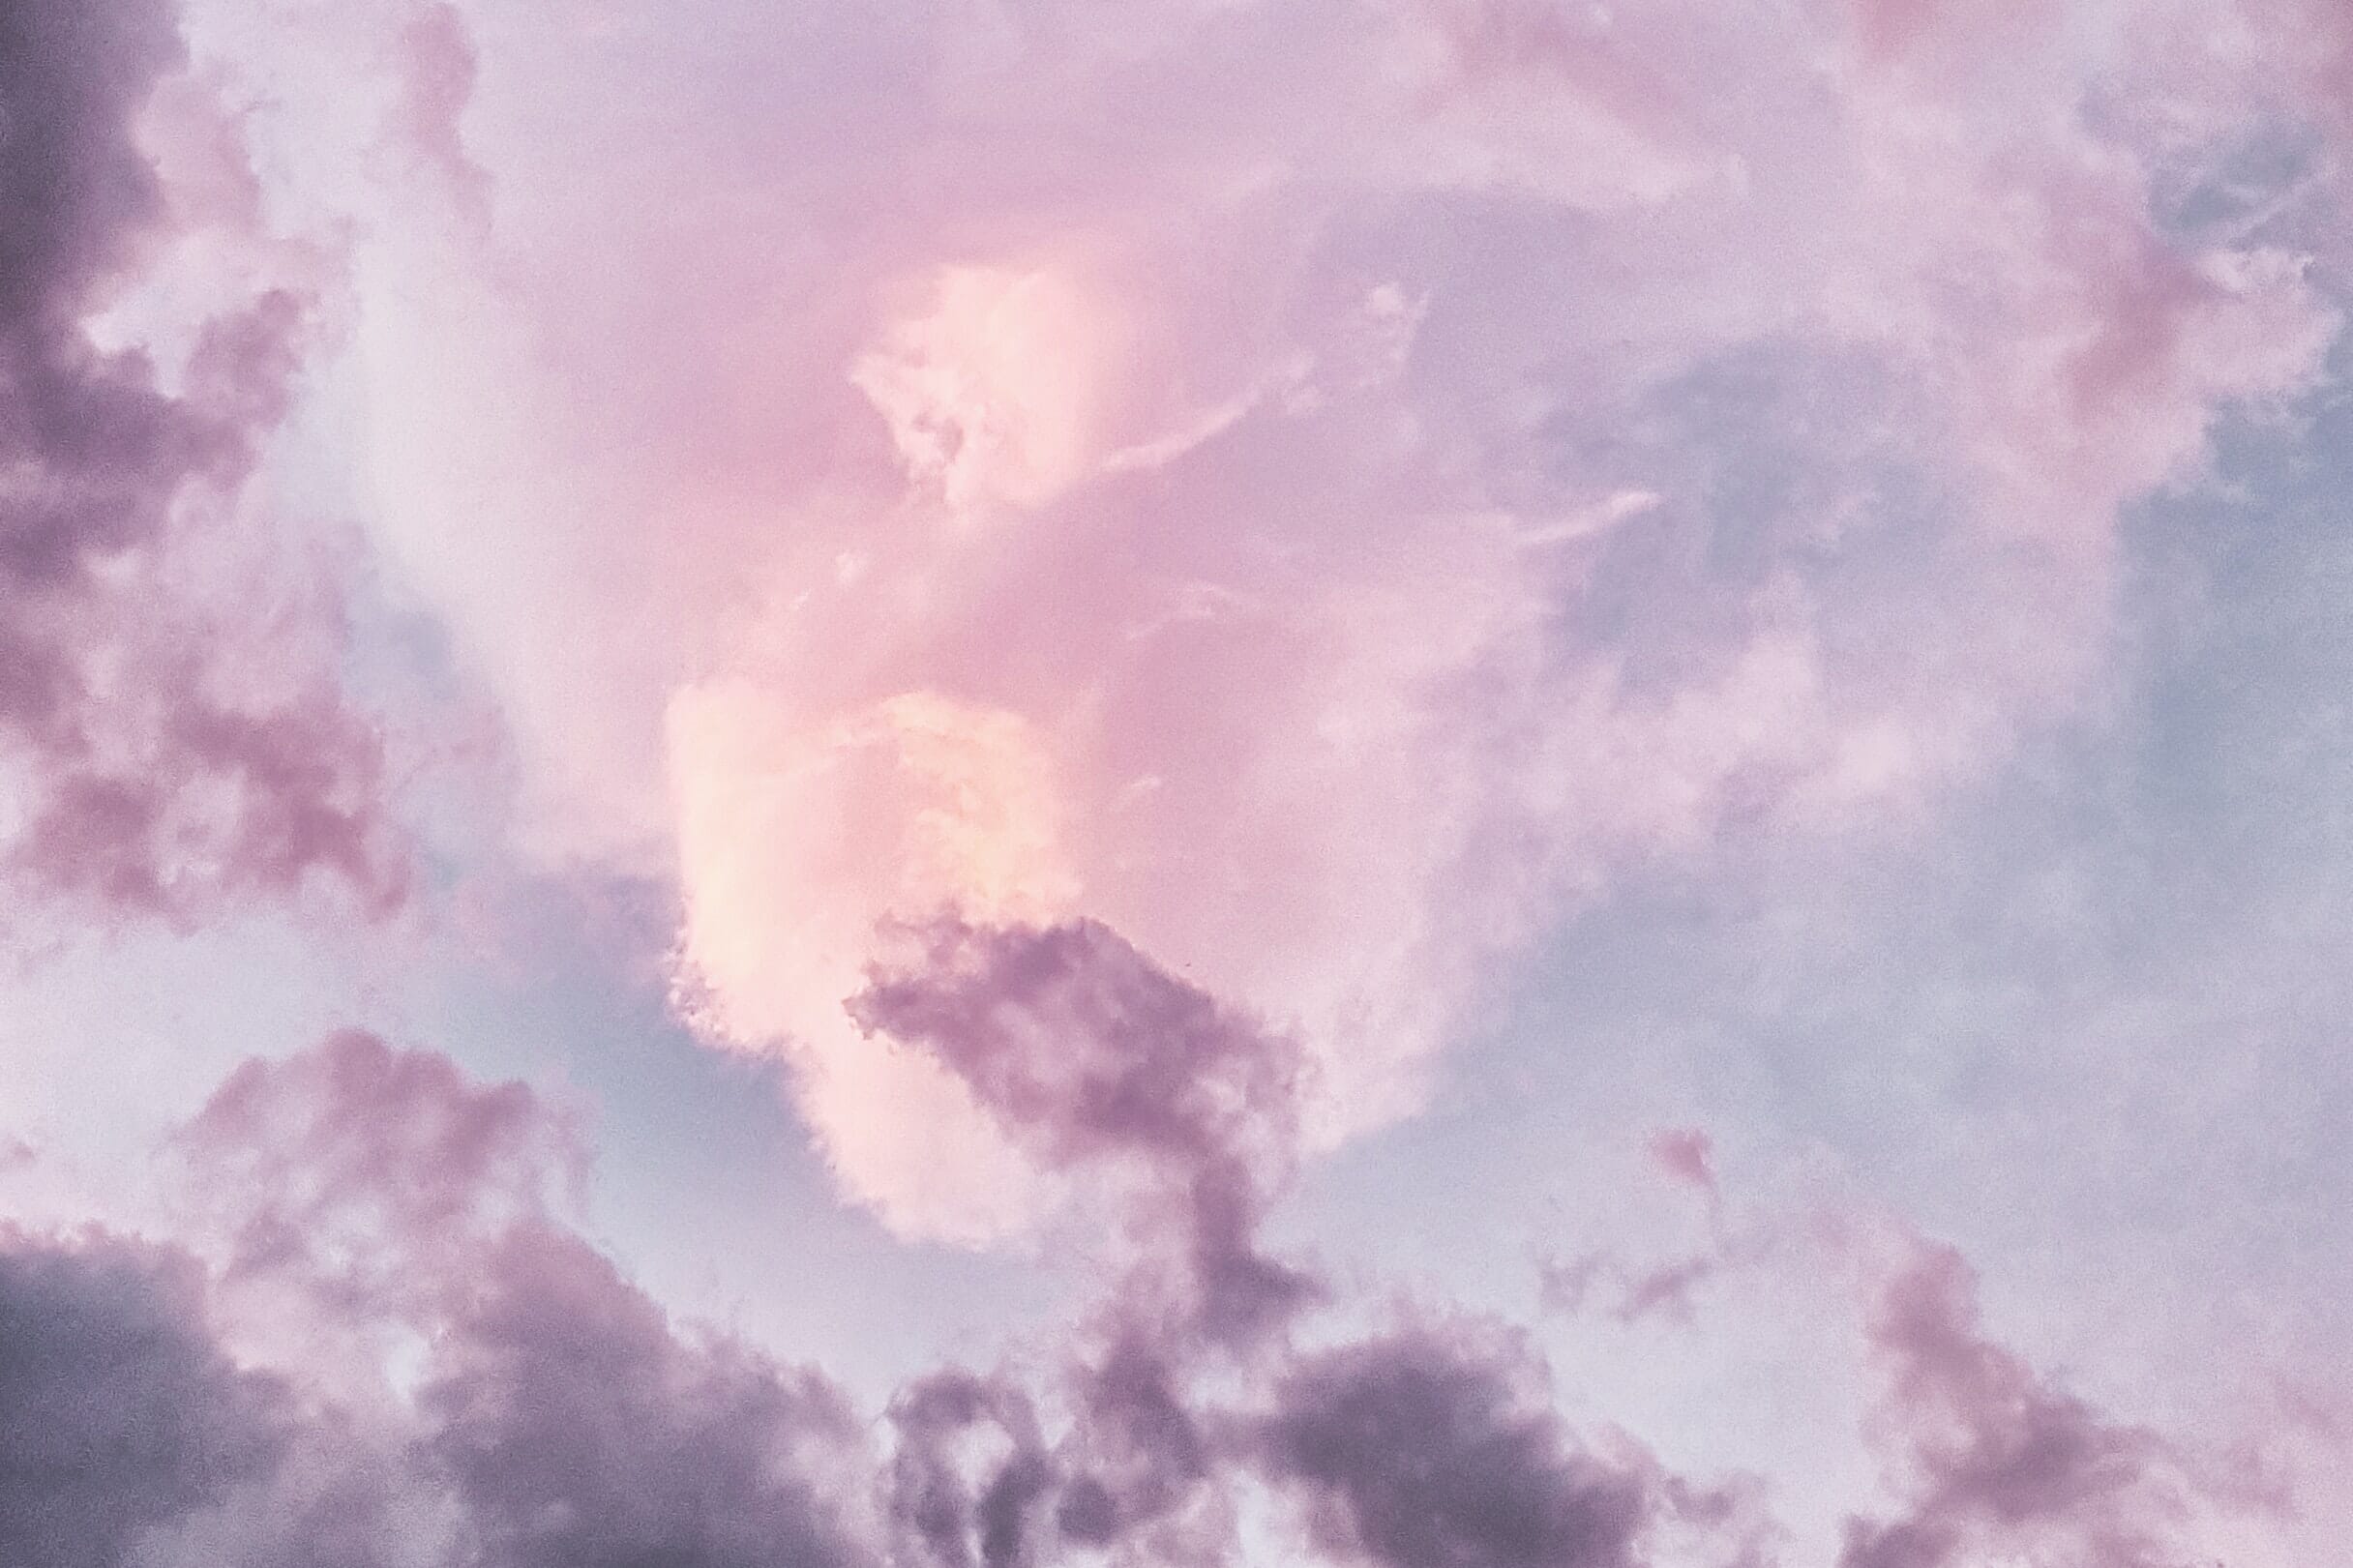 A sky with clouds that look like a cotton candy. - Photography